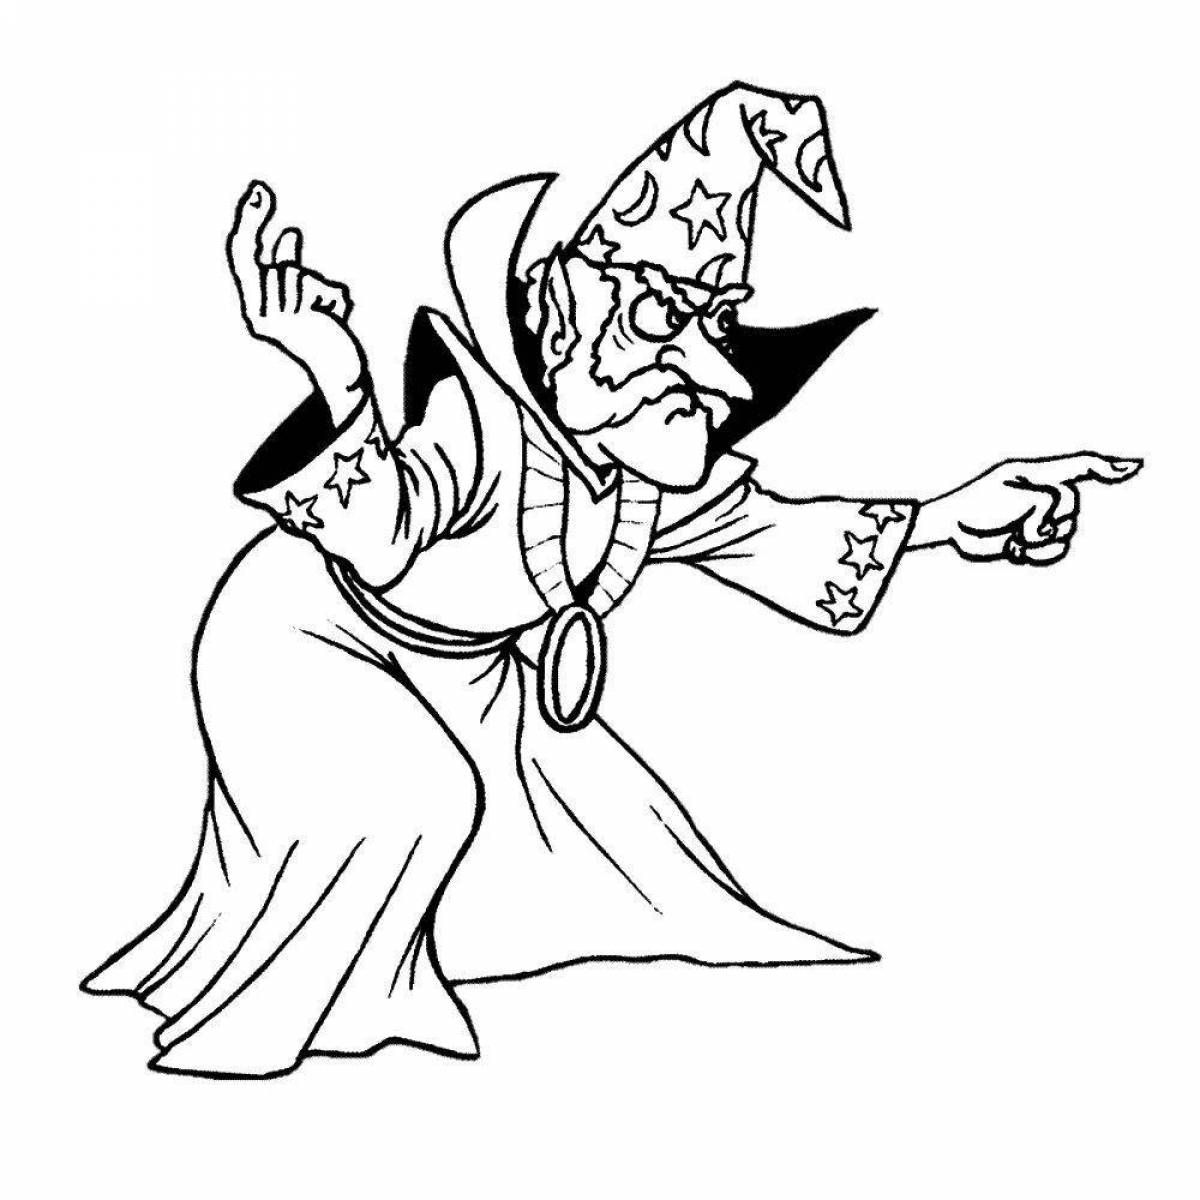 Wonderful wizard coloring pages for kids